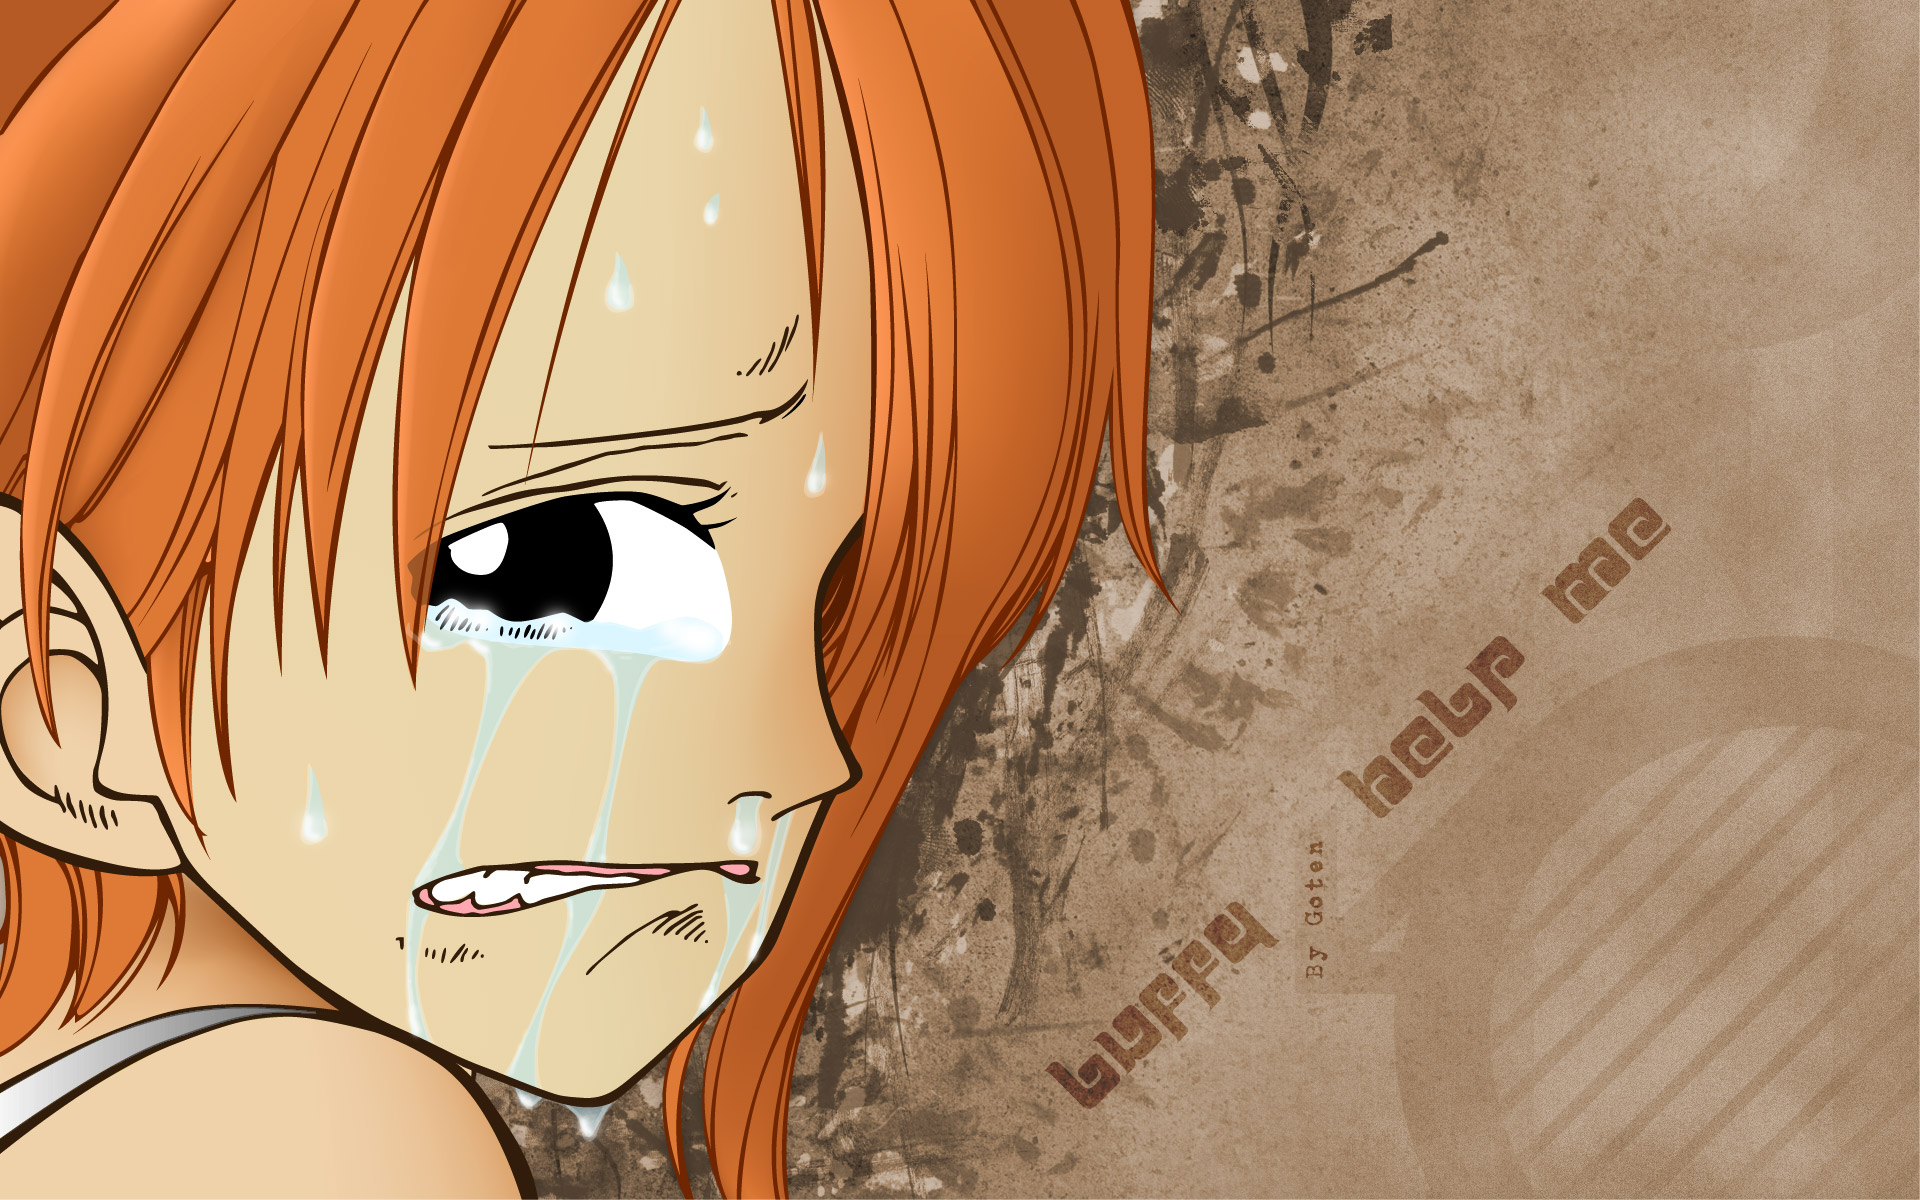 1920x1200 260+ Nami (One Piece) HD Wallpapers and Backgrounds